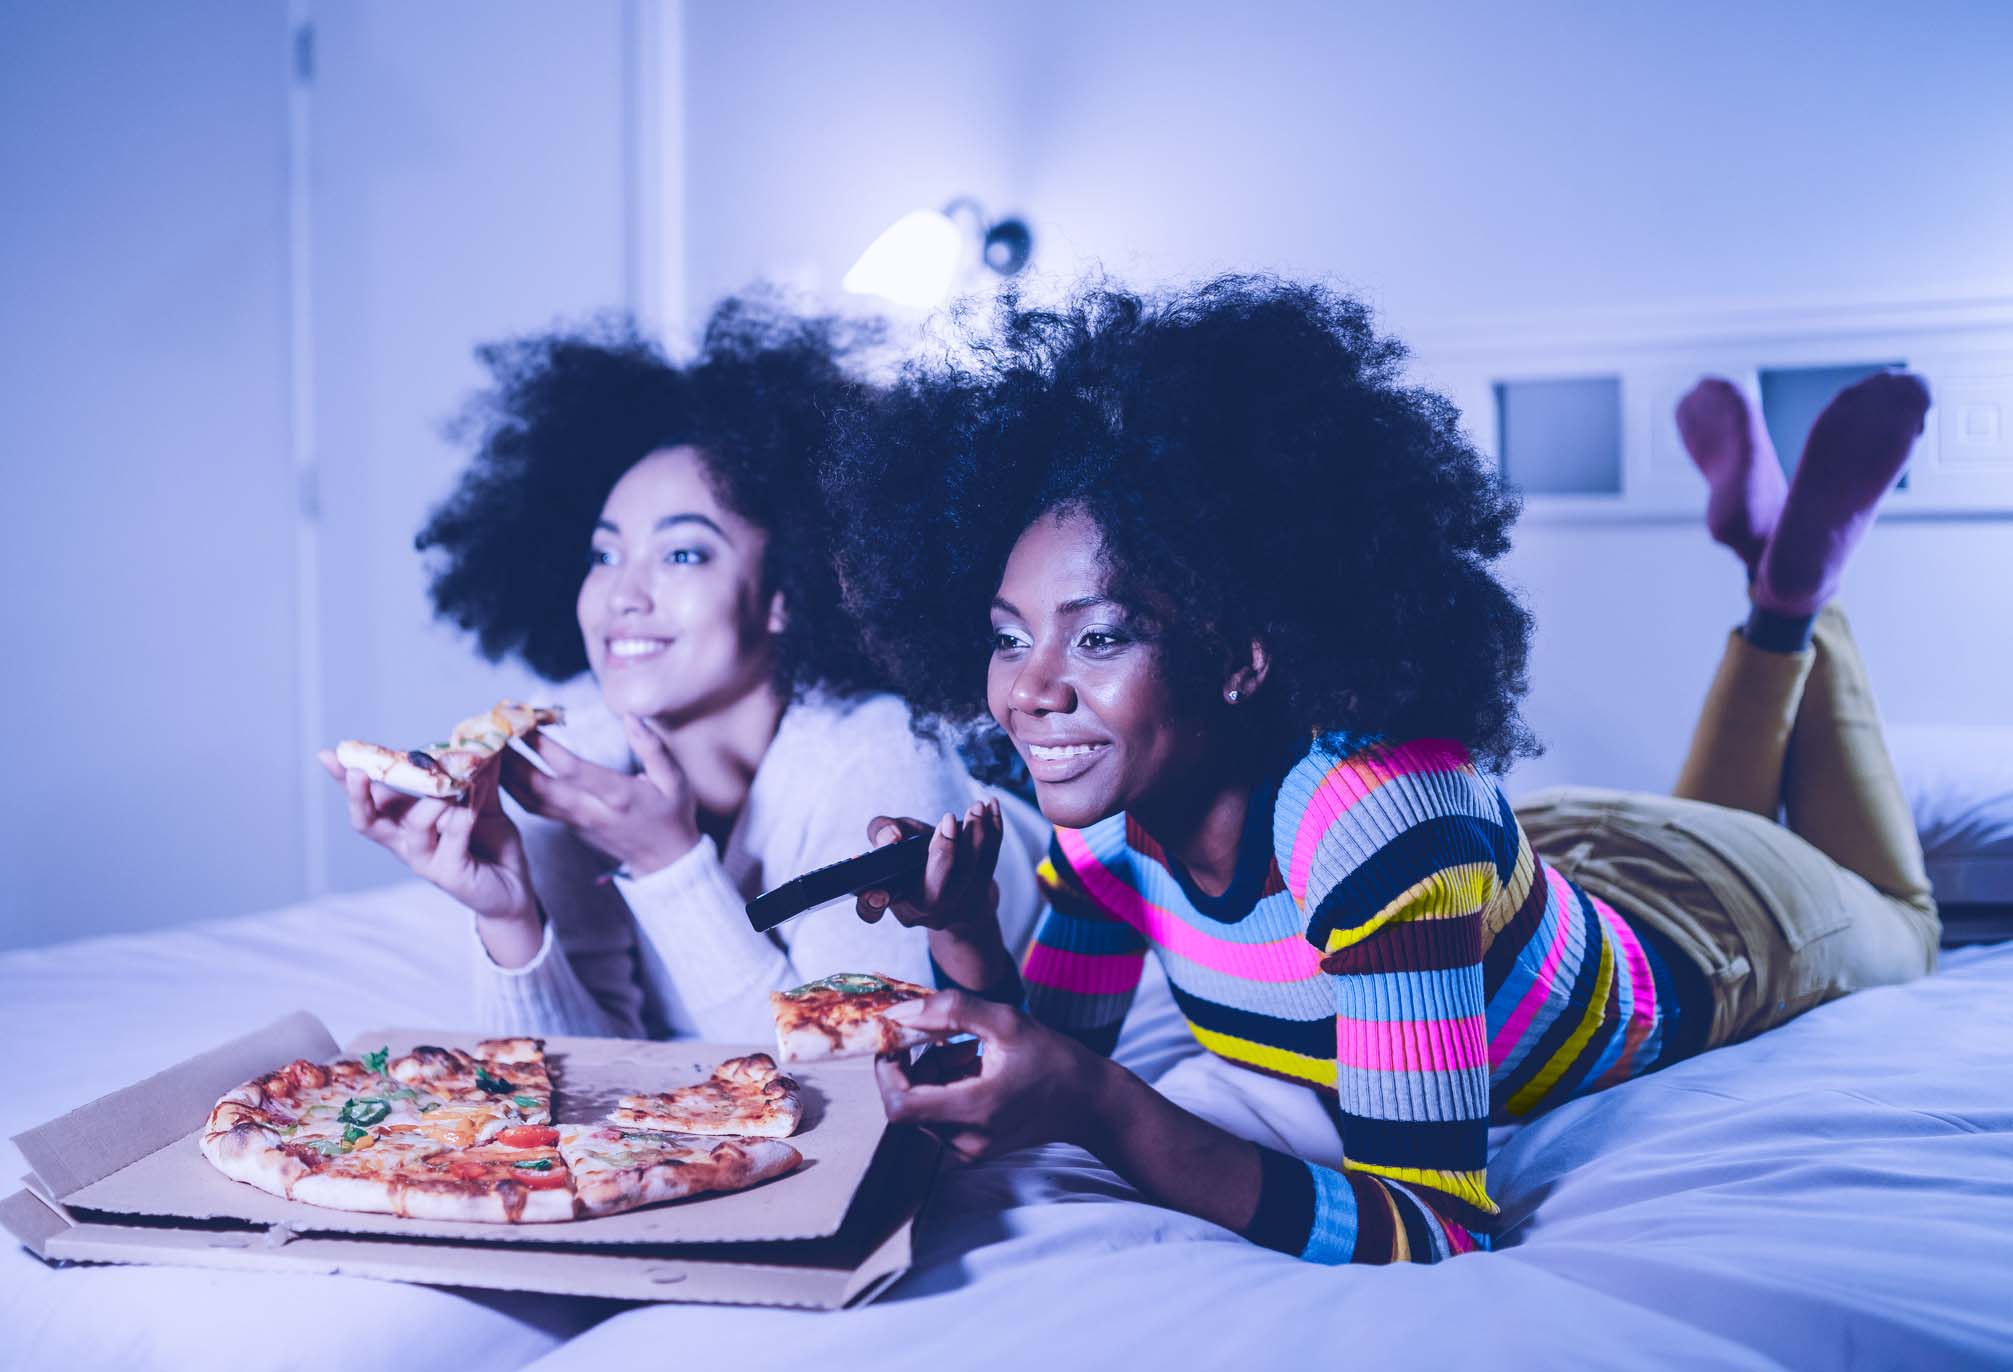 Women with afros wearing striped shirts eating pizza and watching TV